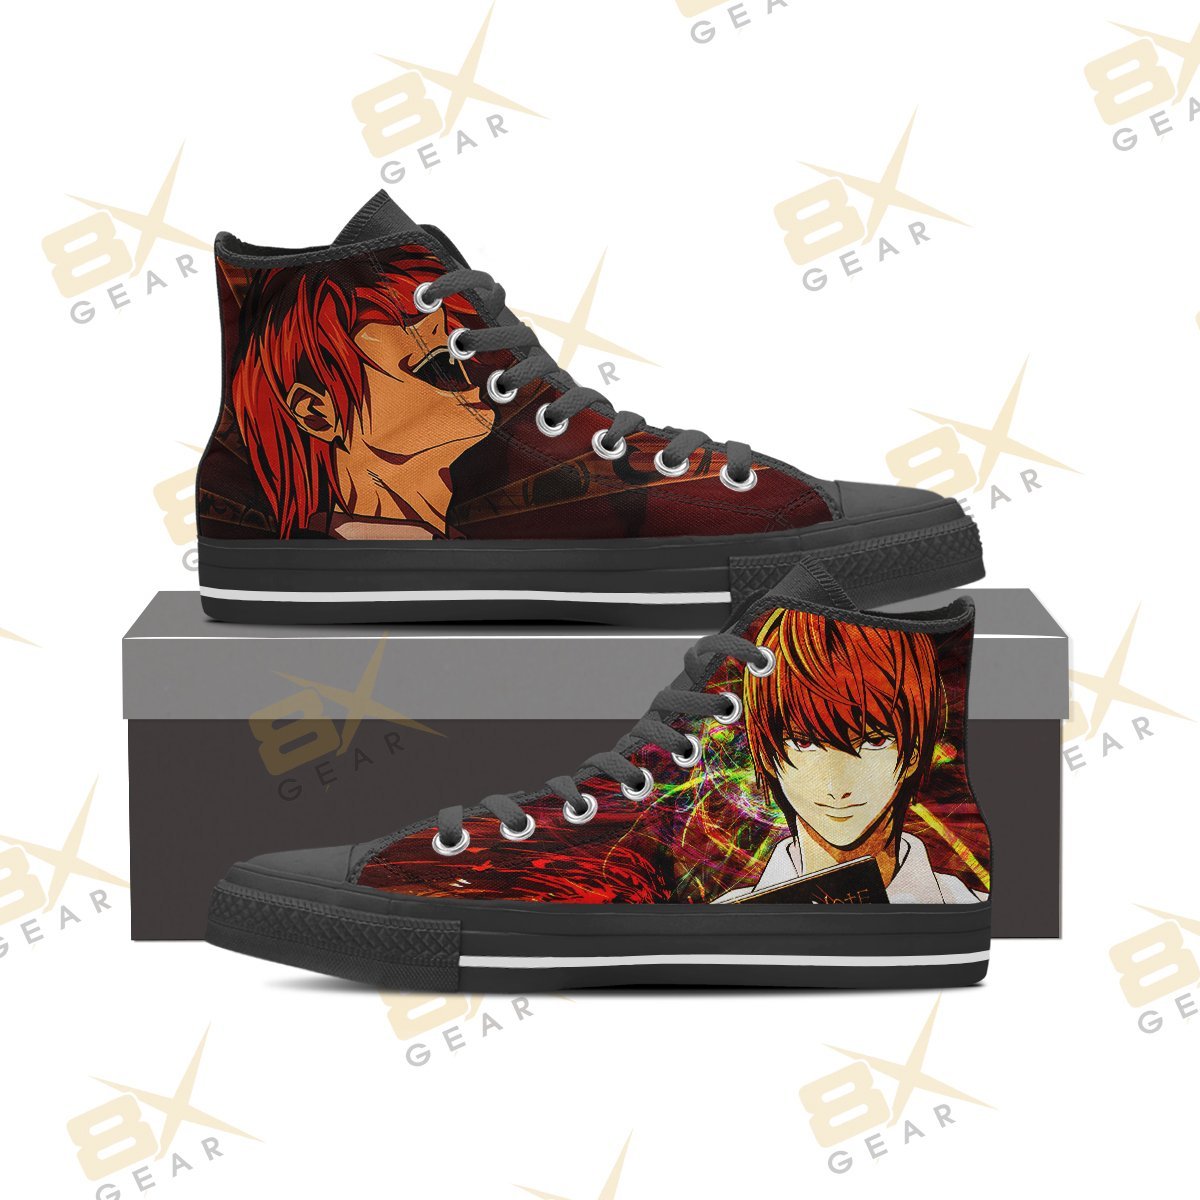 Attractive Light Yagami Death Note Anime Shoes Hi Top Sneakers